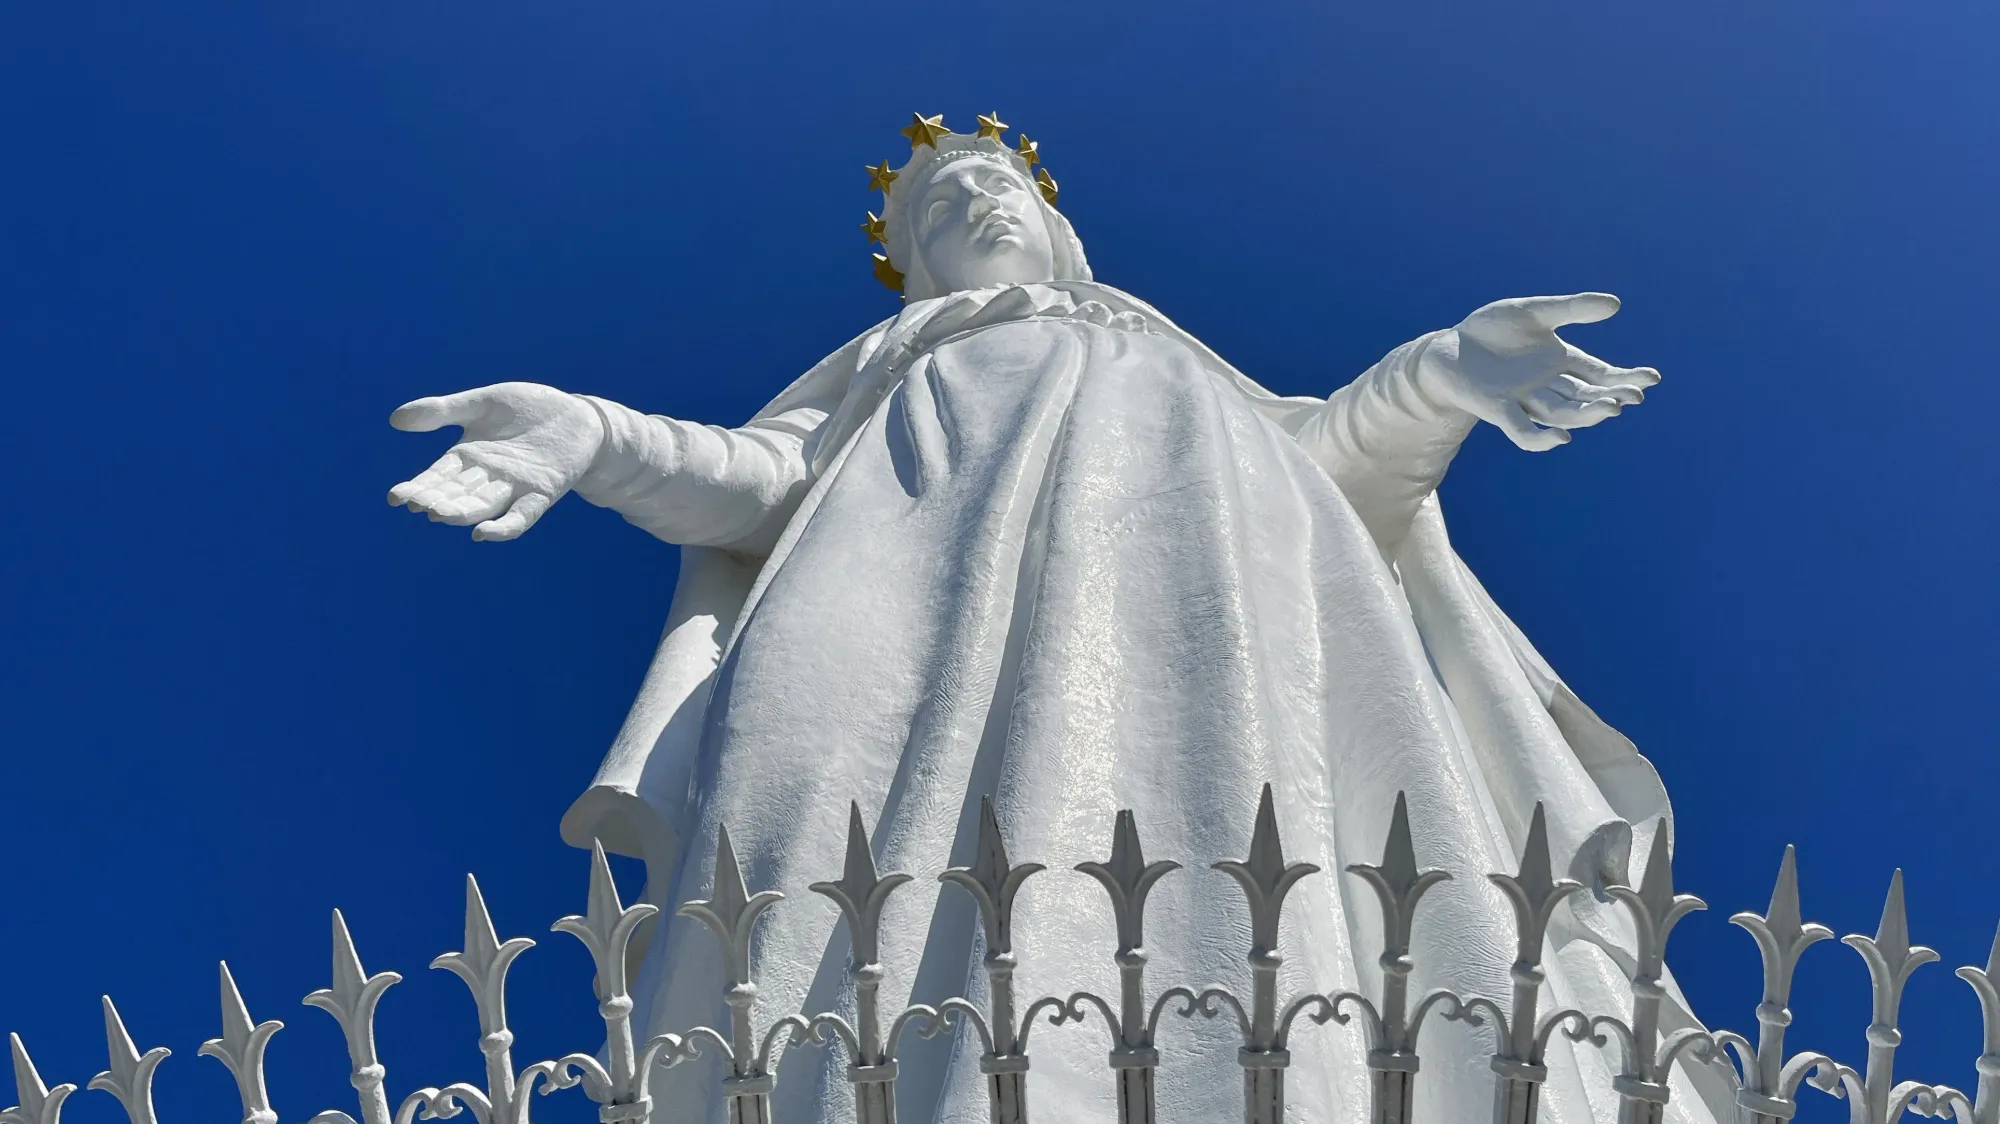 Looking up at the outstretched hands of the white statue of Our Lady of Lebanon